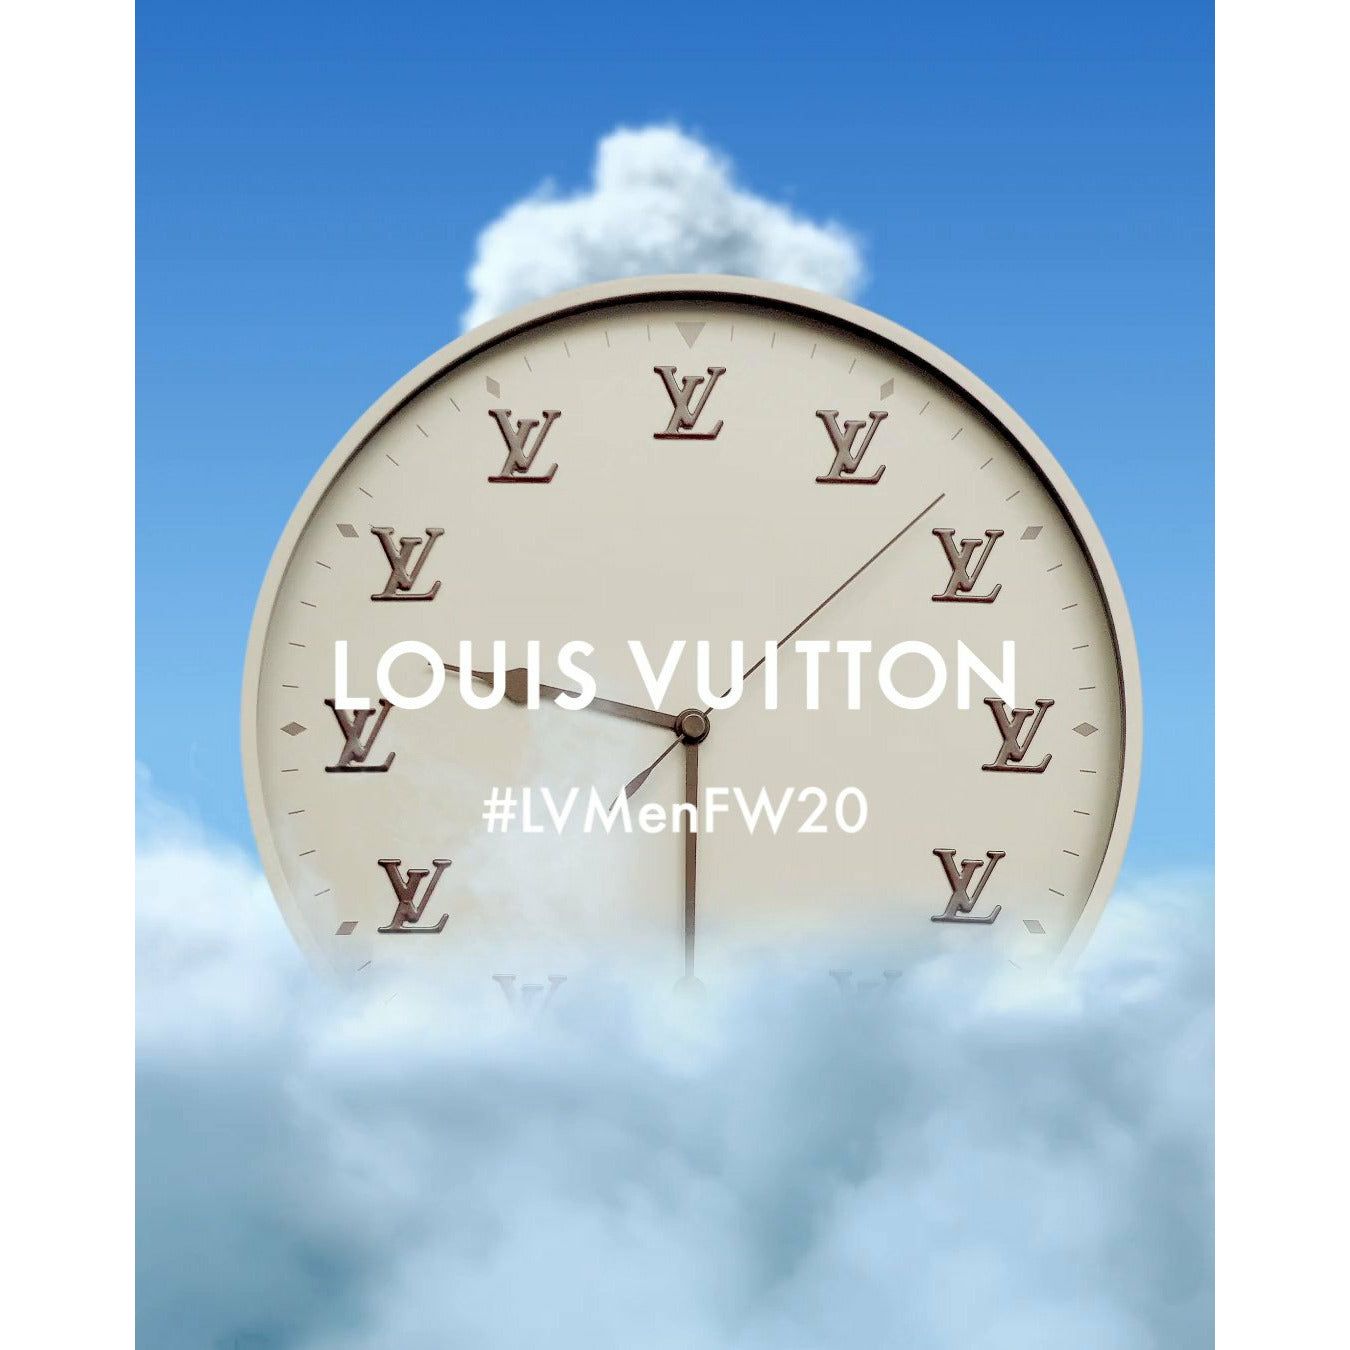 Virgil Abloh Makes Full Circle Statement With Louis Vuitton